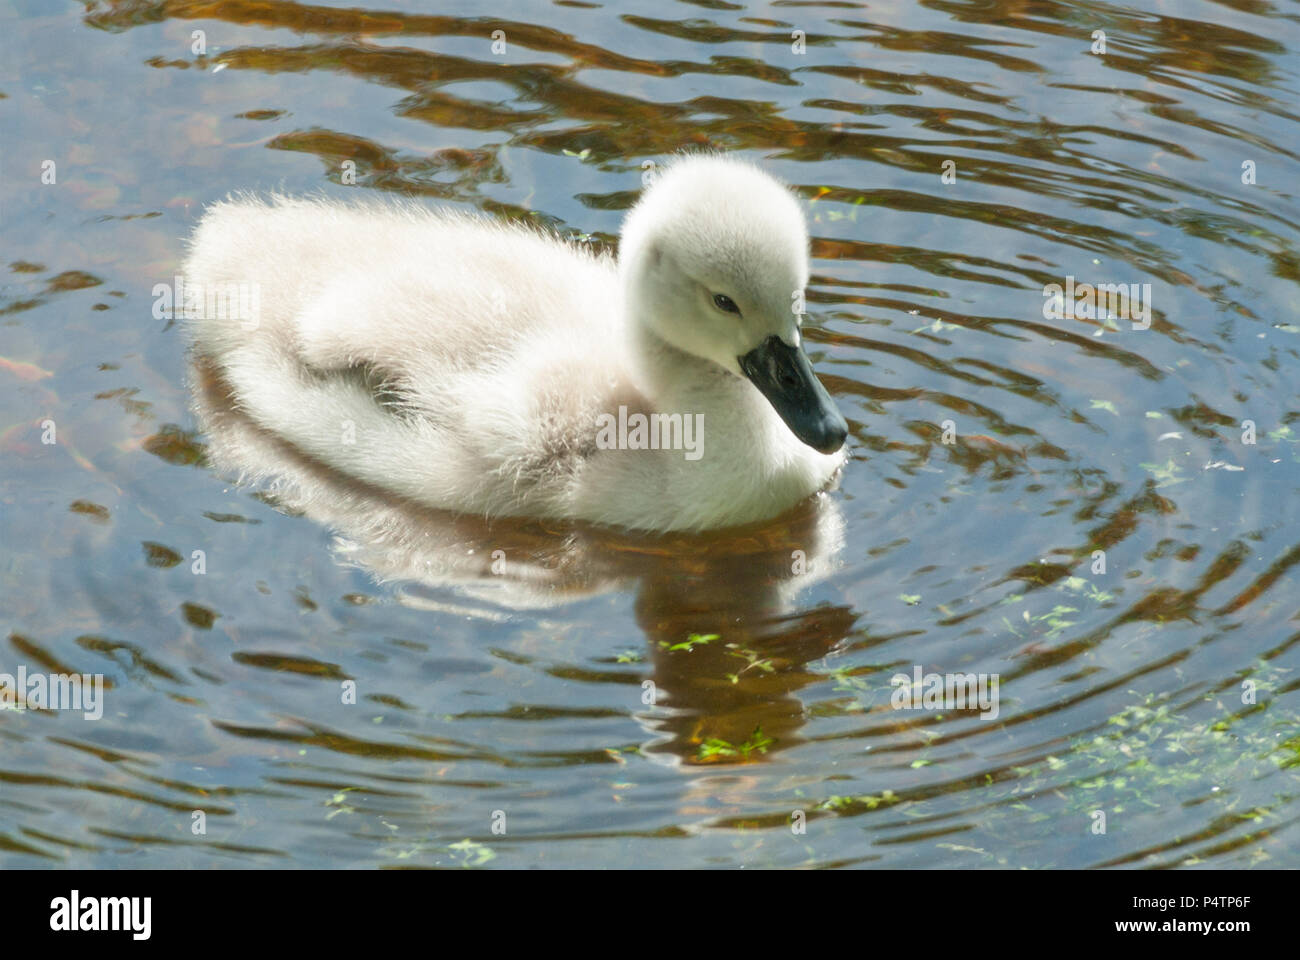 Soft, dawny cygnet, young of the Mute Swan, swimming in the sunlit water of a pond, exploring the world on it s own. s Gravelandse buitenplaatsen Neth Stock Photo